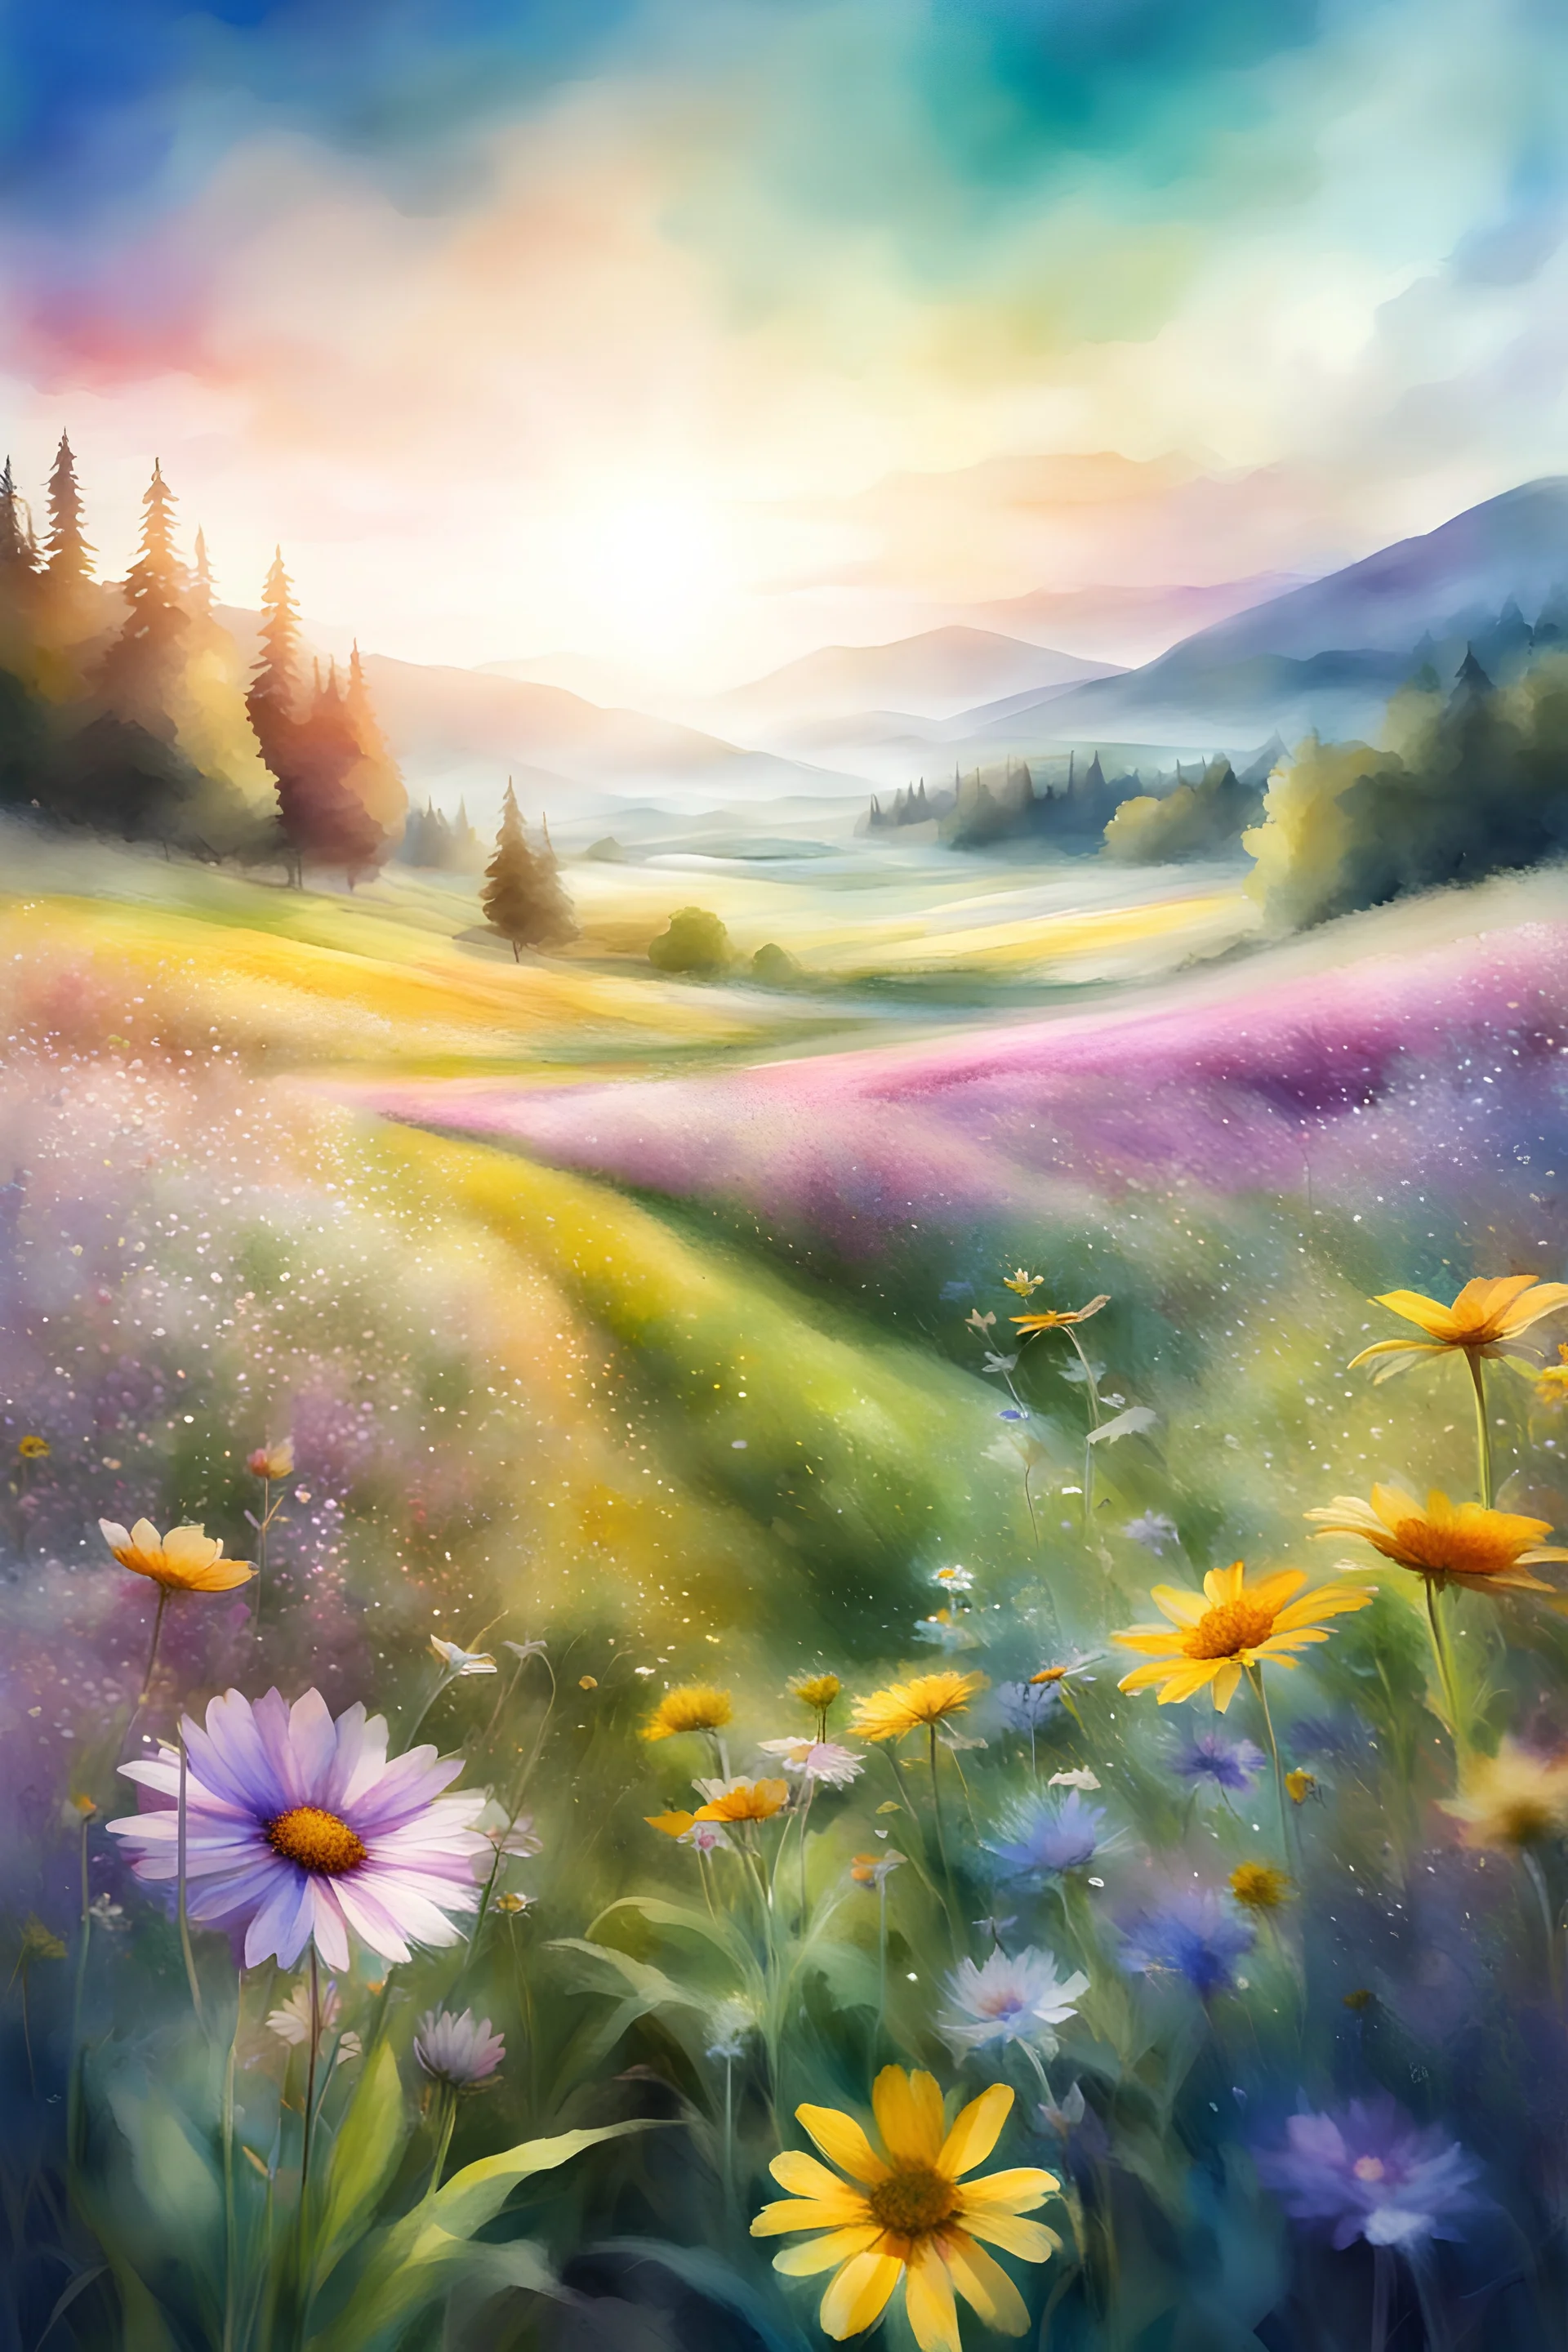 "Beautiful hippie long exposure Digital watercolor Illustration of a Beautiful hippie, an field of wild flowers, Stylized watercolor art, Intricate, 3D, HDR, Sharp, soft Cinematic Volumetric lighting, pastel colours, perfect wide long shot visual masterpiece"